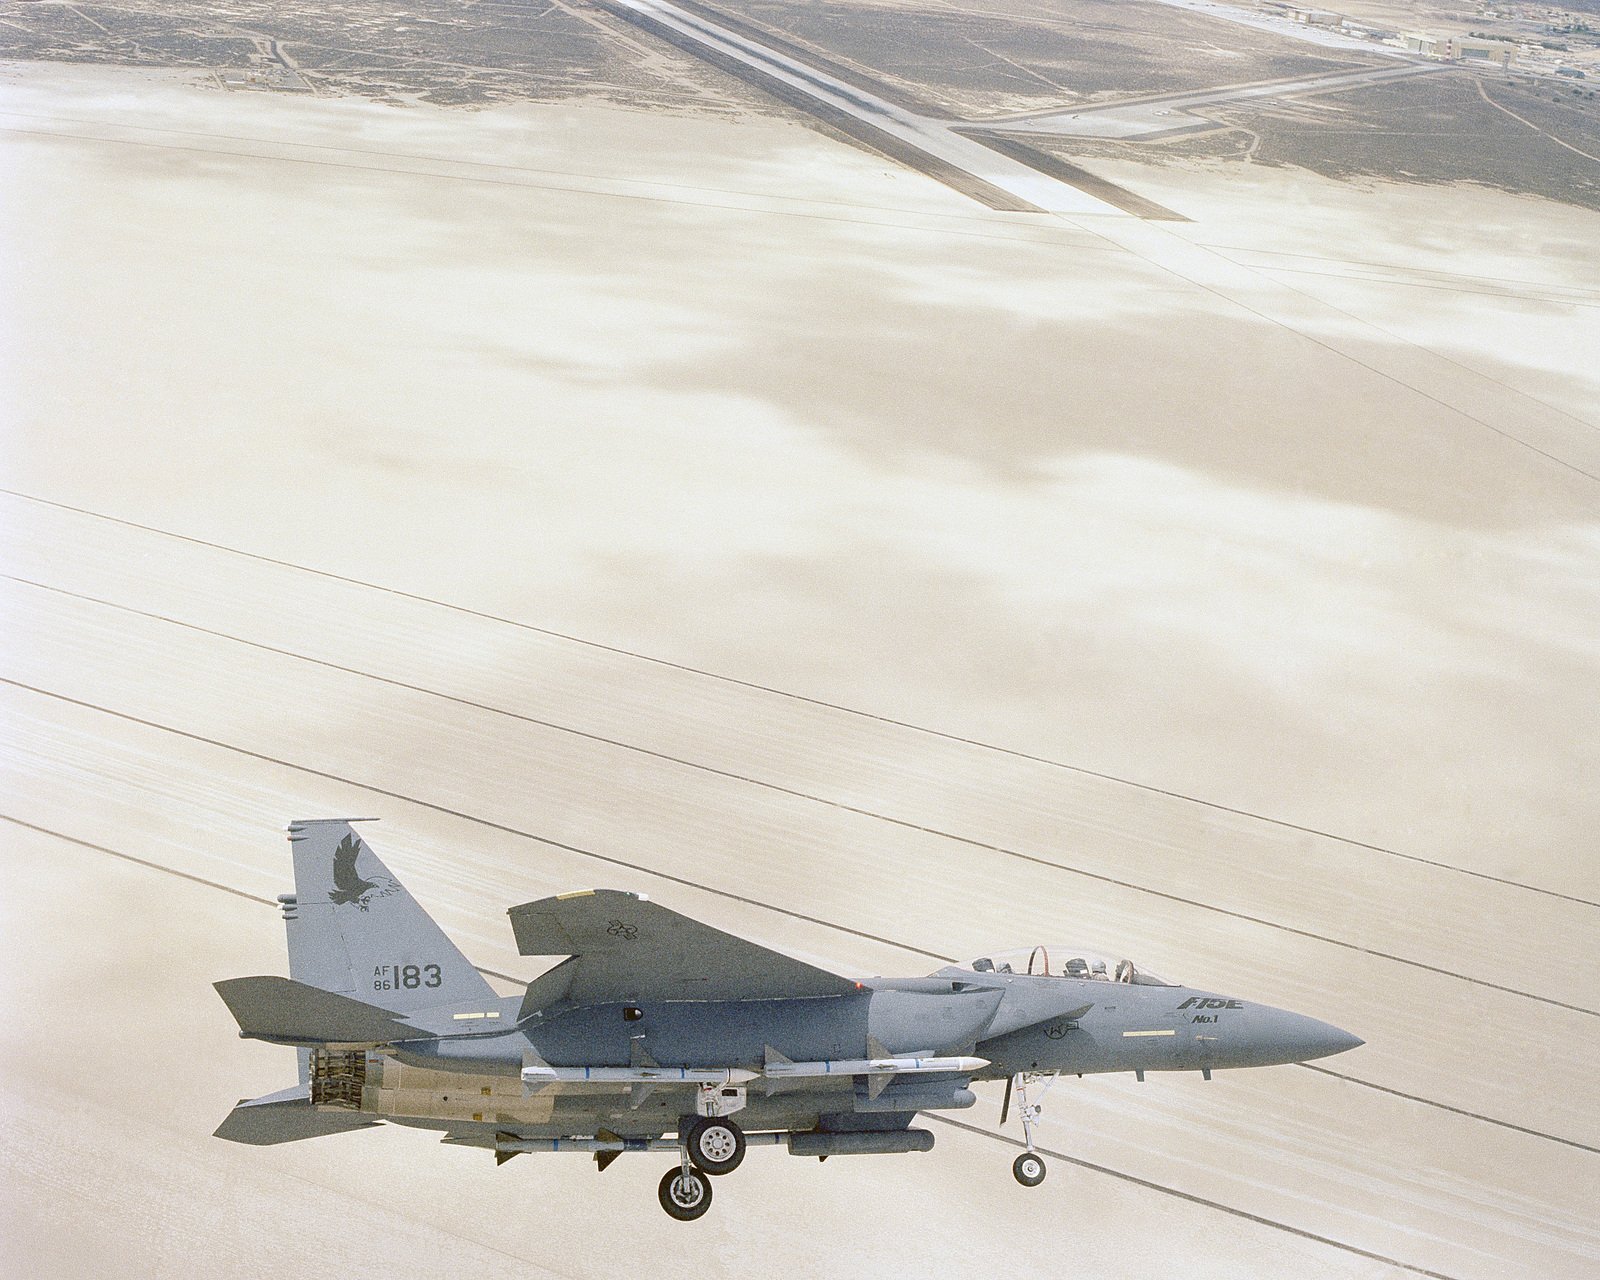 An F 15e Eagle Aircraft Armed With Aim 7 Sparrow Missiles Comes In For A Landing During Flight Evaluations Nara Dvids Public Domain Archive Public Domain Search